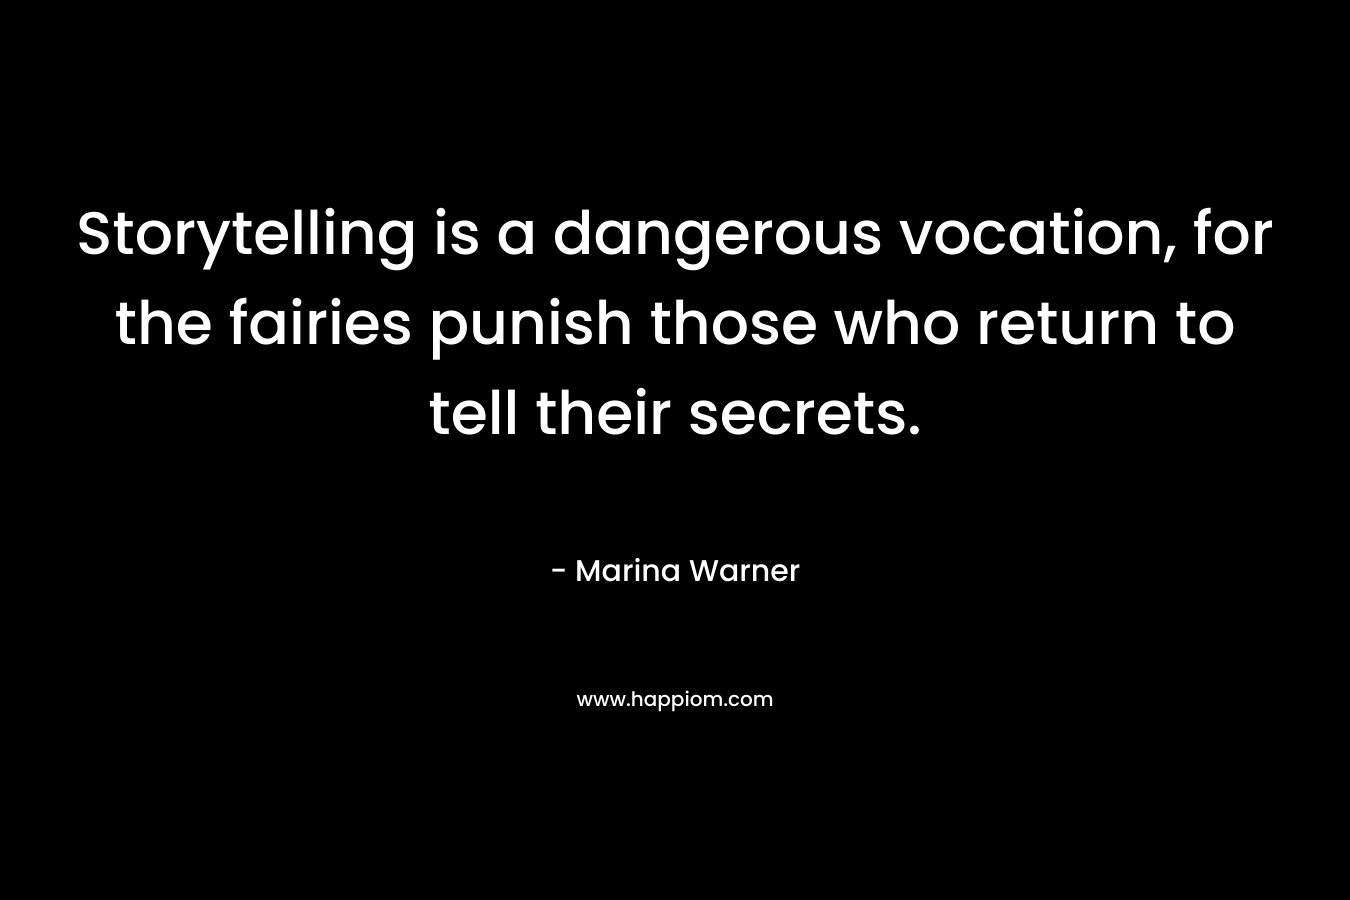 Storytelling is a dangerous vocation, for the fairies punish those who return to tell their secrets.